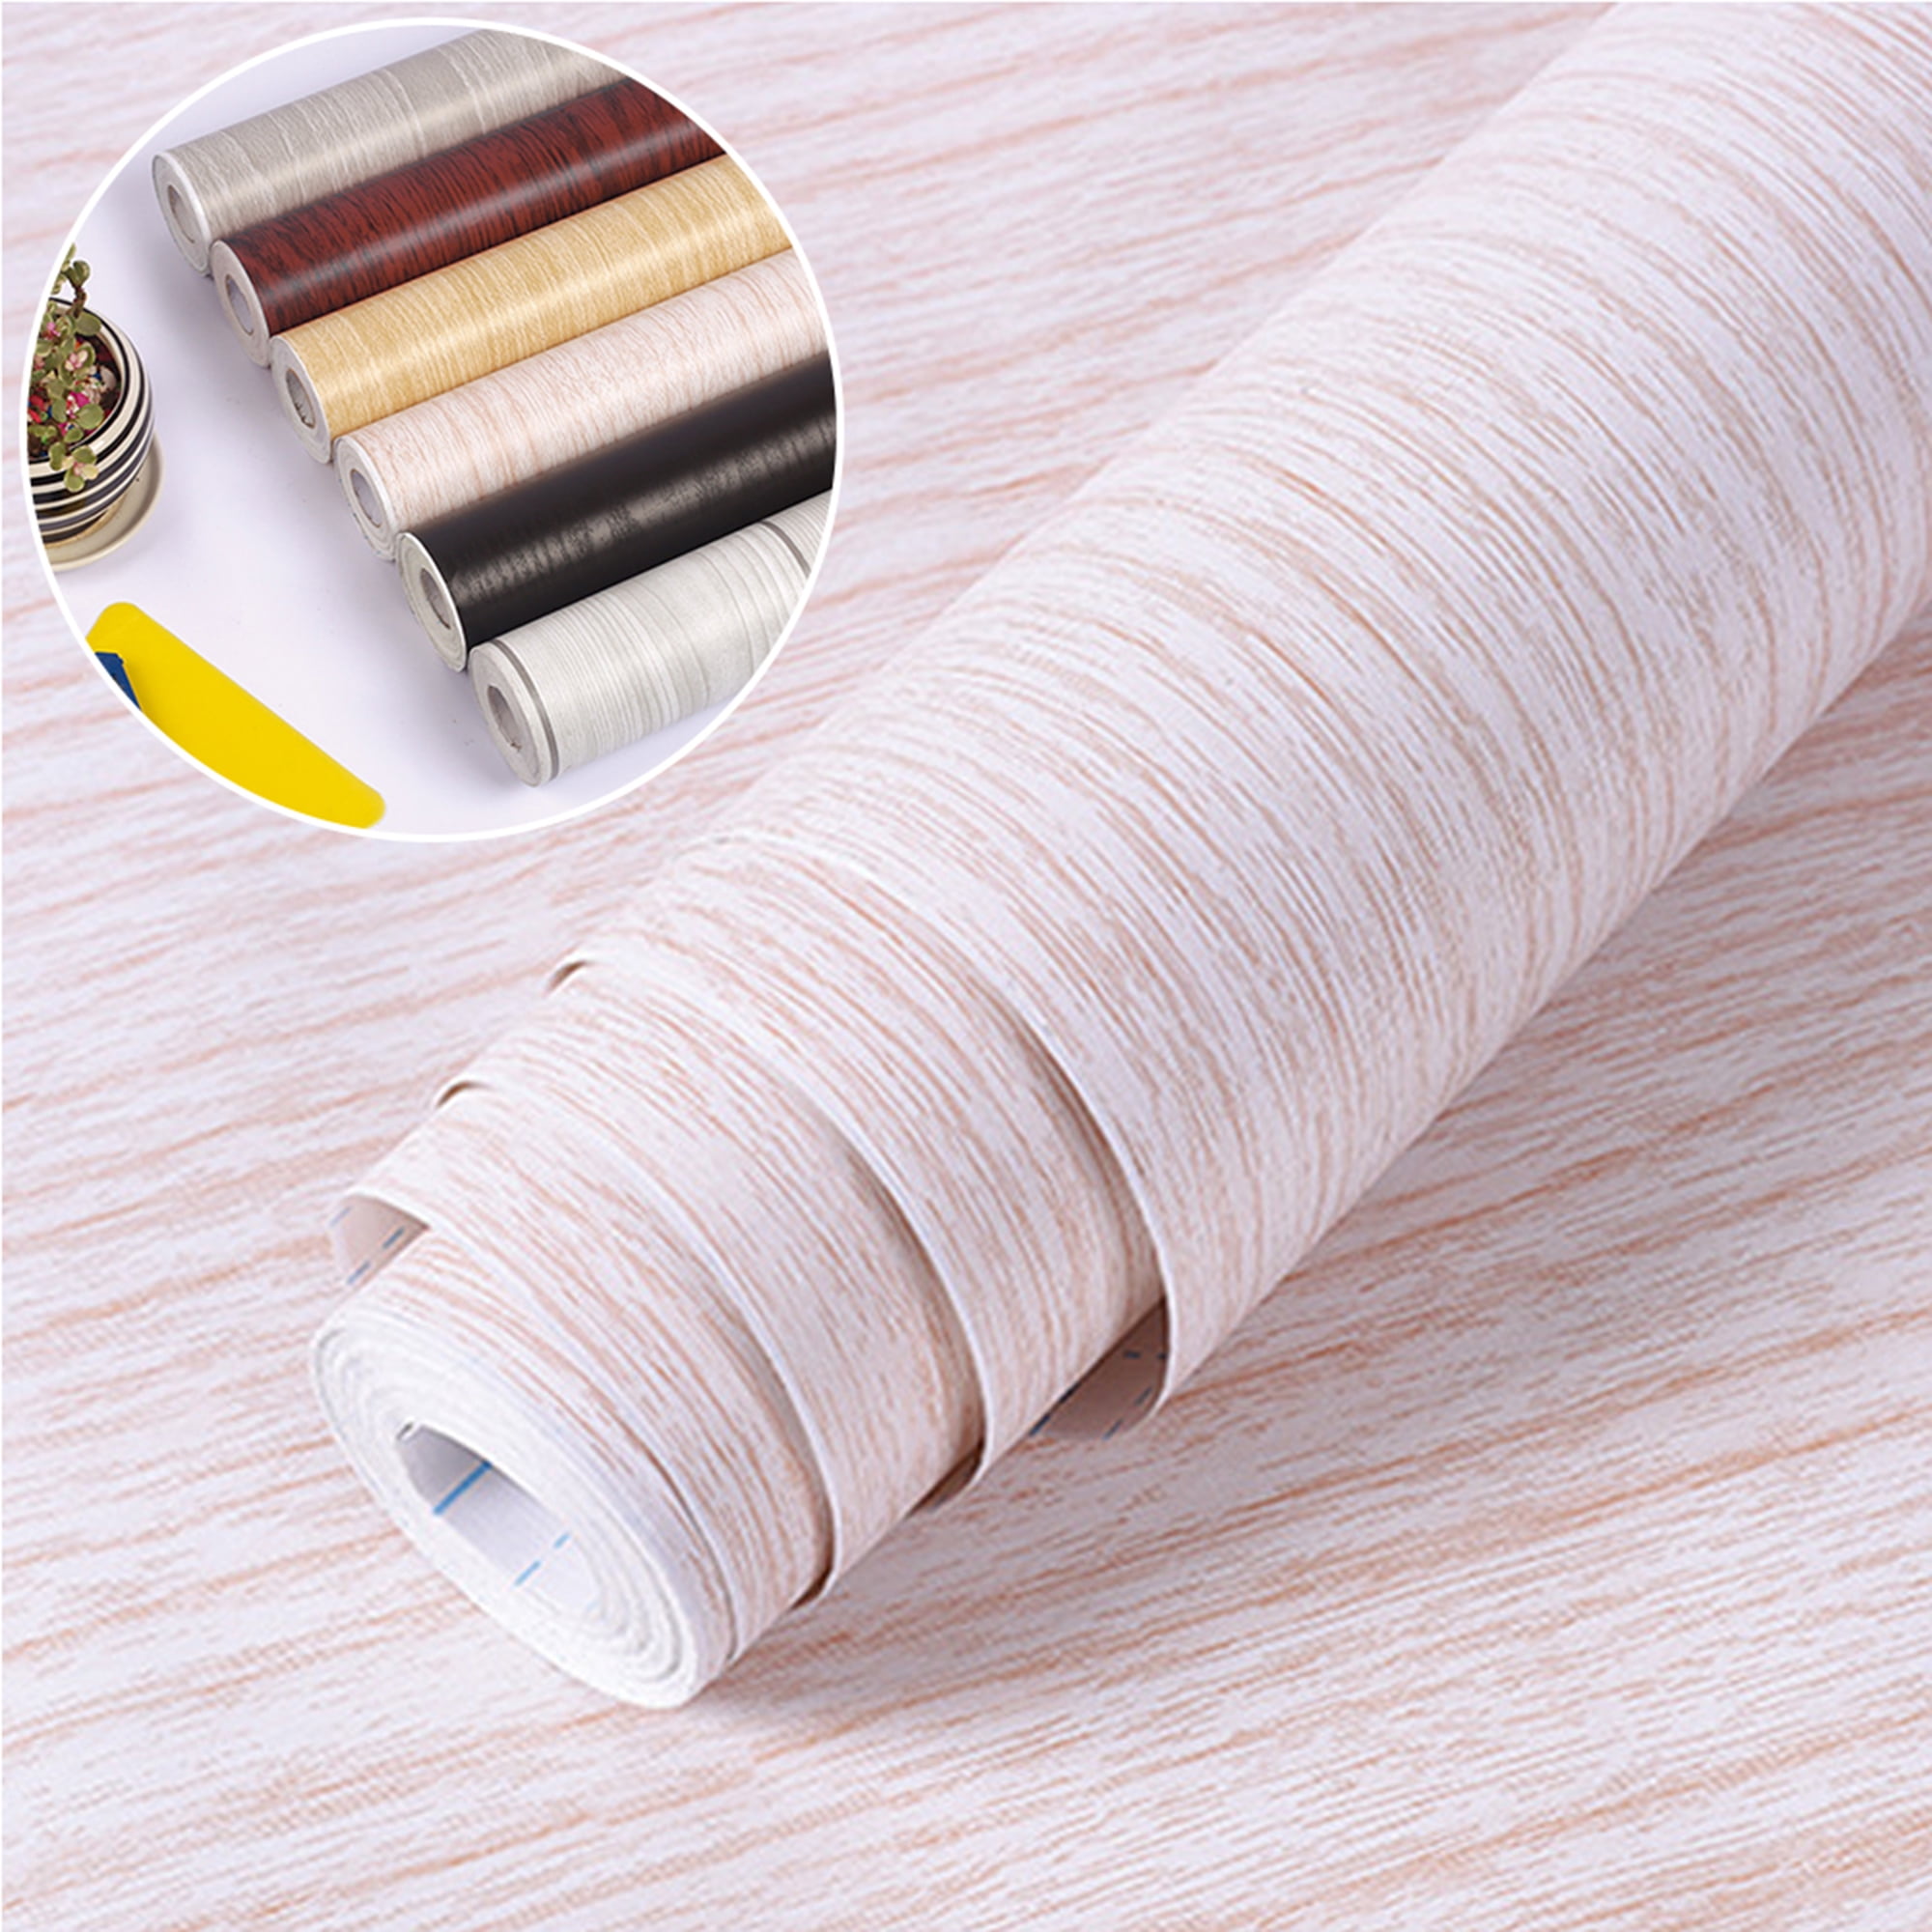 Details about   10m Wood Self Adhesive Wallpaper Kitchen Furniture Wall Sticker Contact Paper